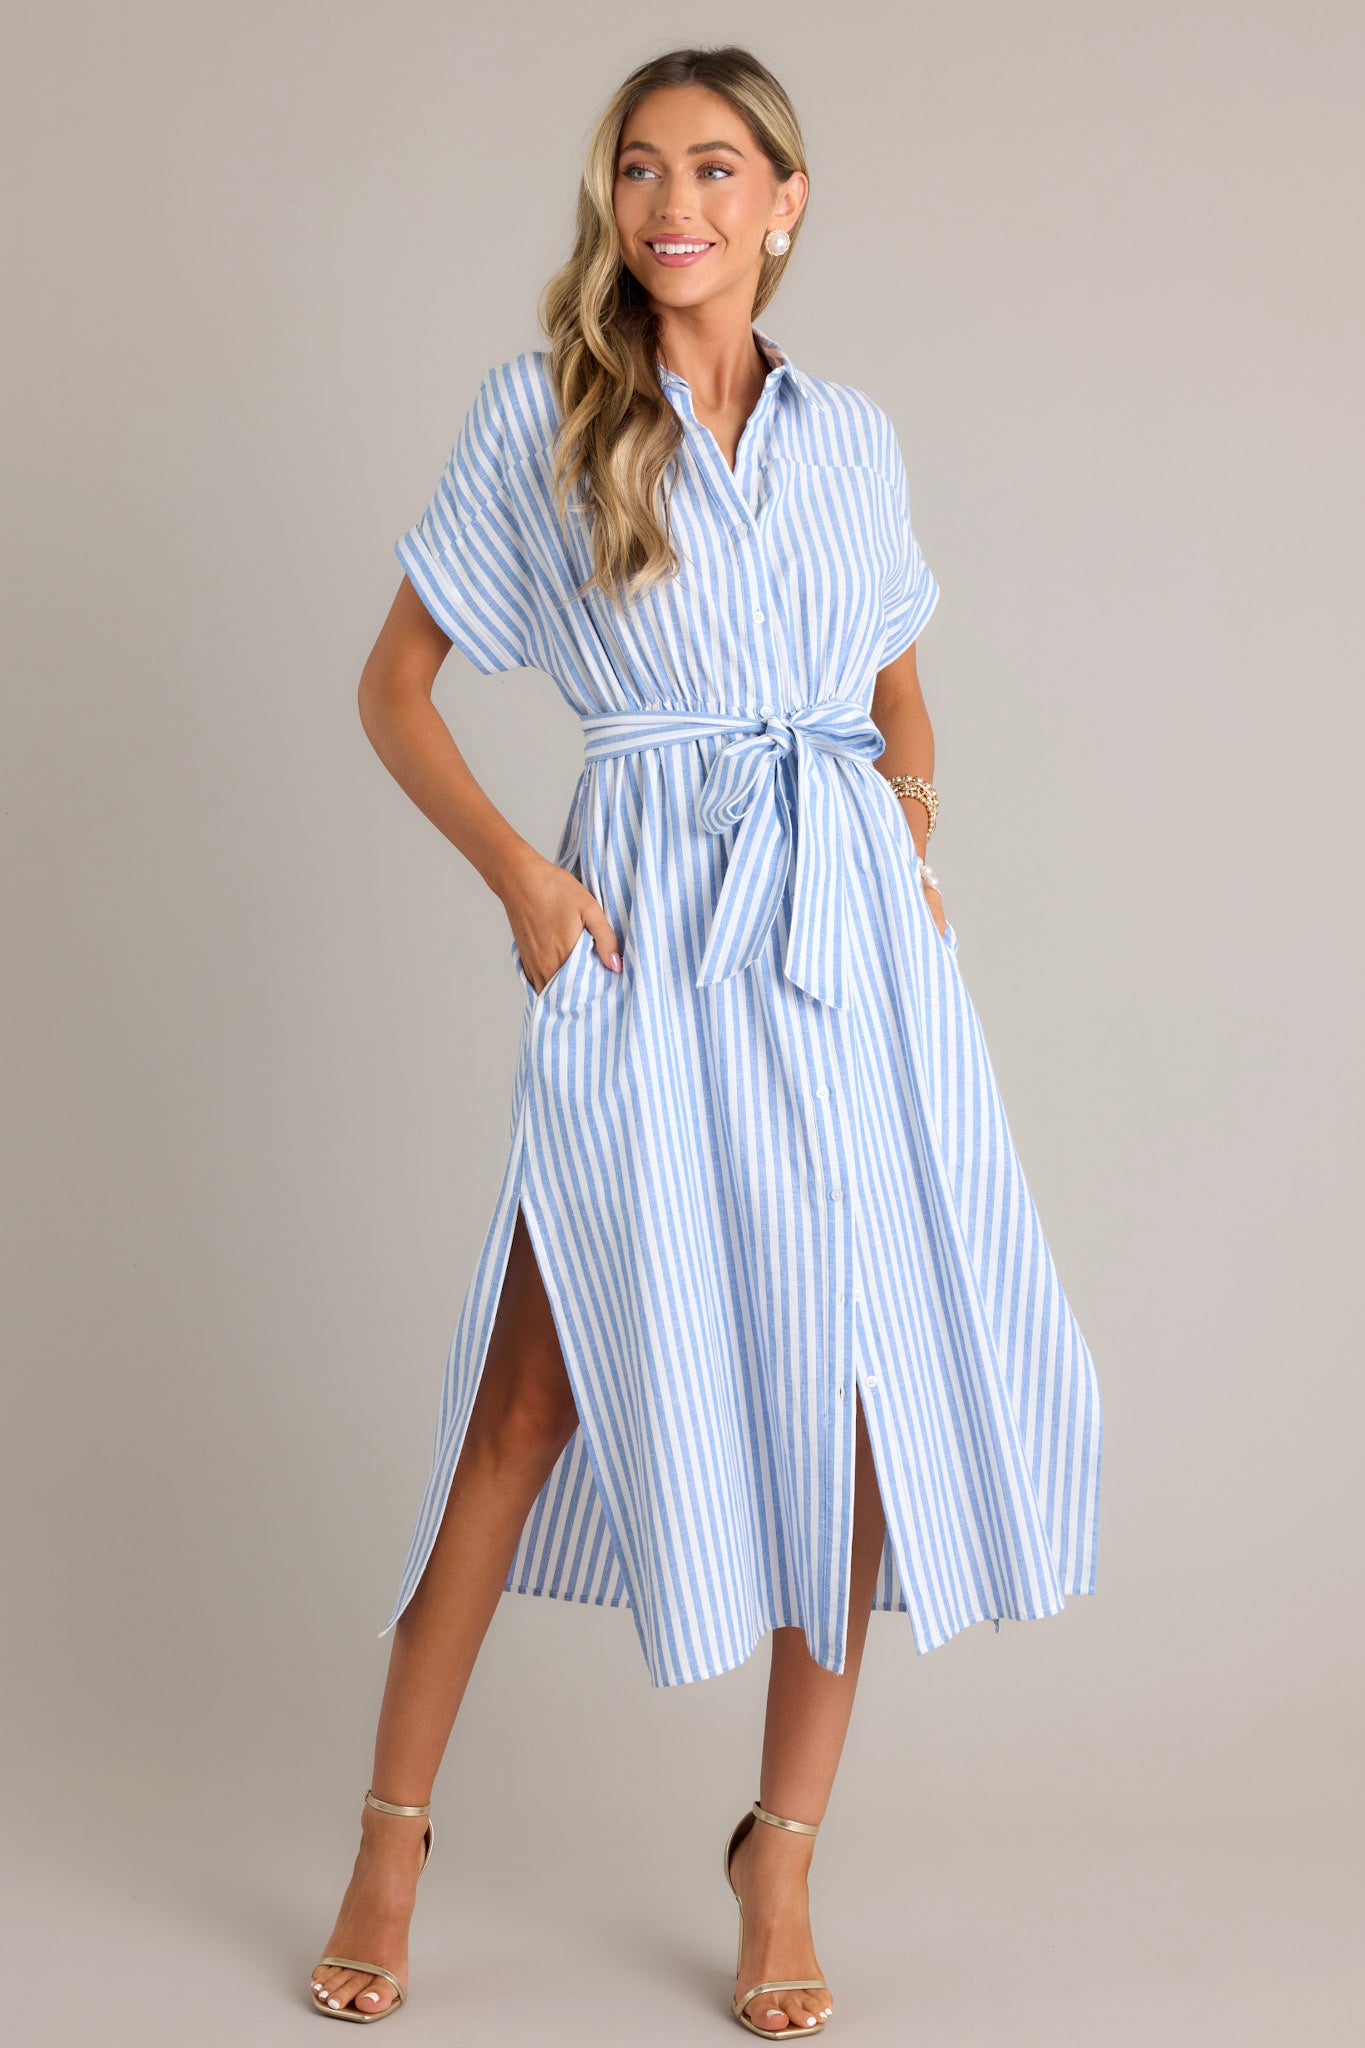 This white and blue dress features a collared neckline, a full button front, a fitted waist, a self-tie waist belt, functional pockets, two side slits, and folded short sleeves.